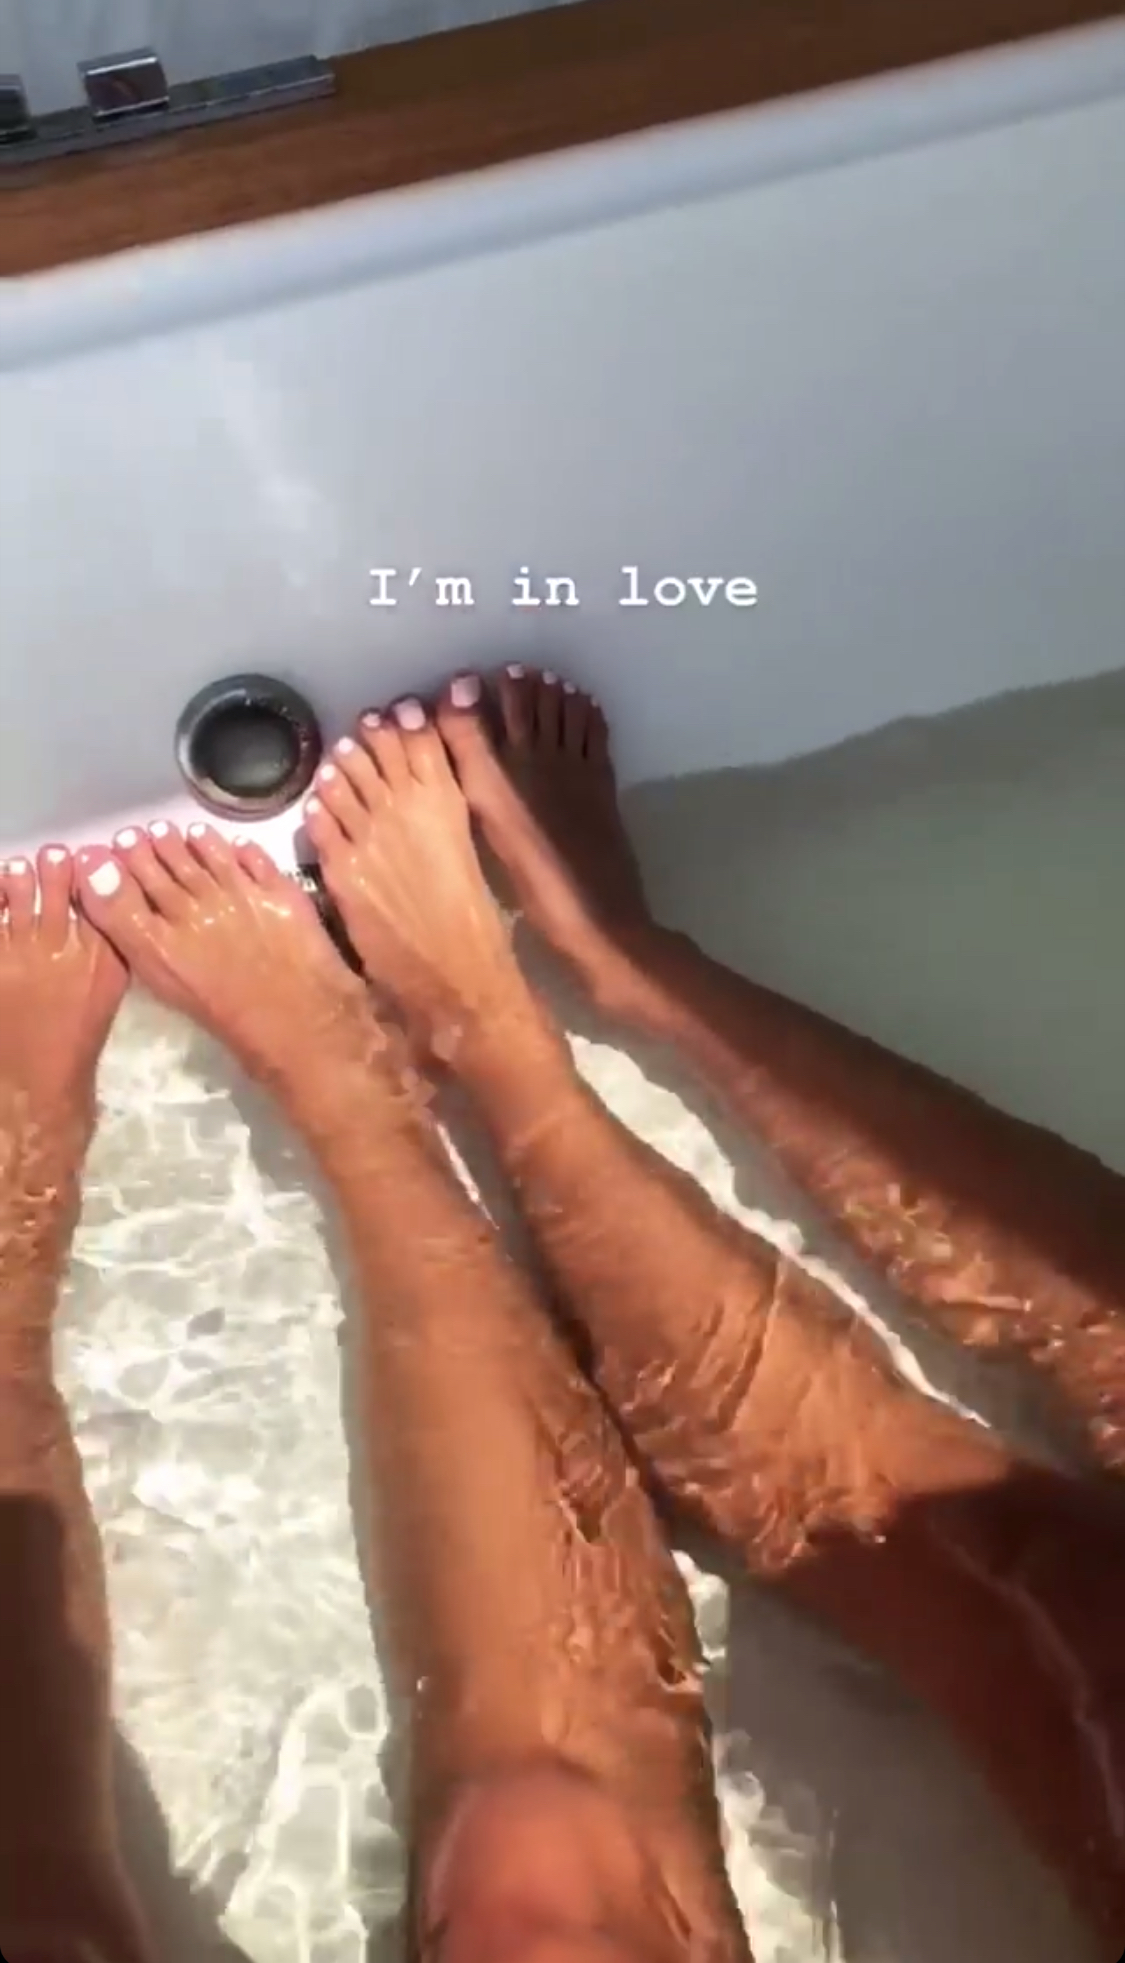 People who liked Erika Costell's feet, also liked.